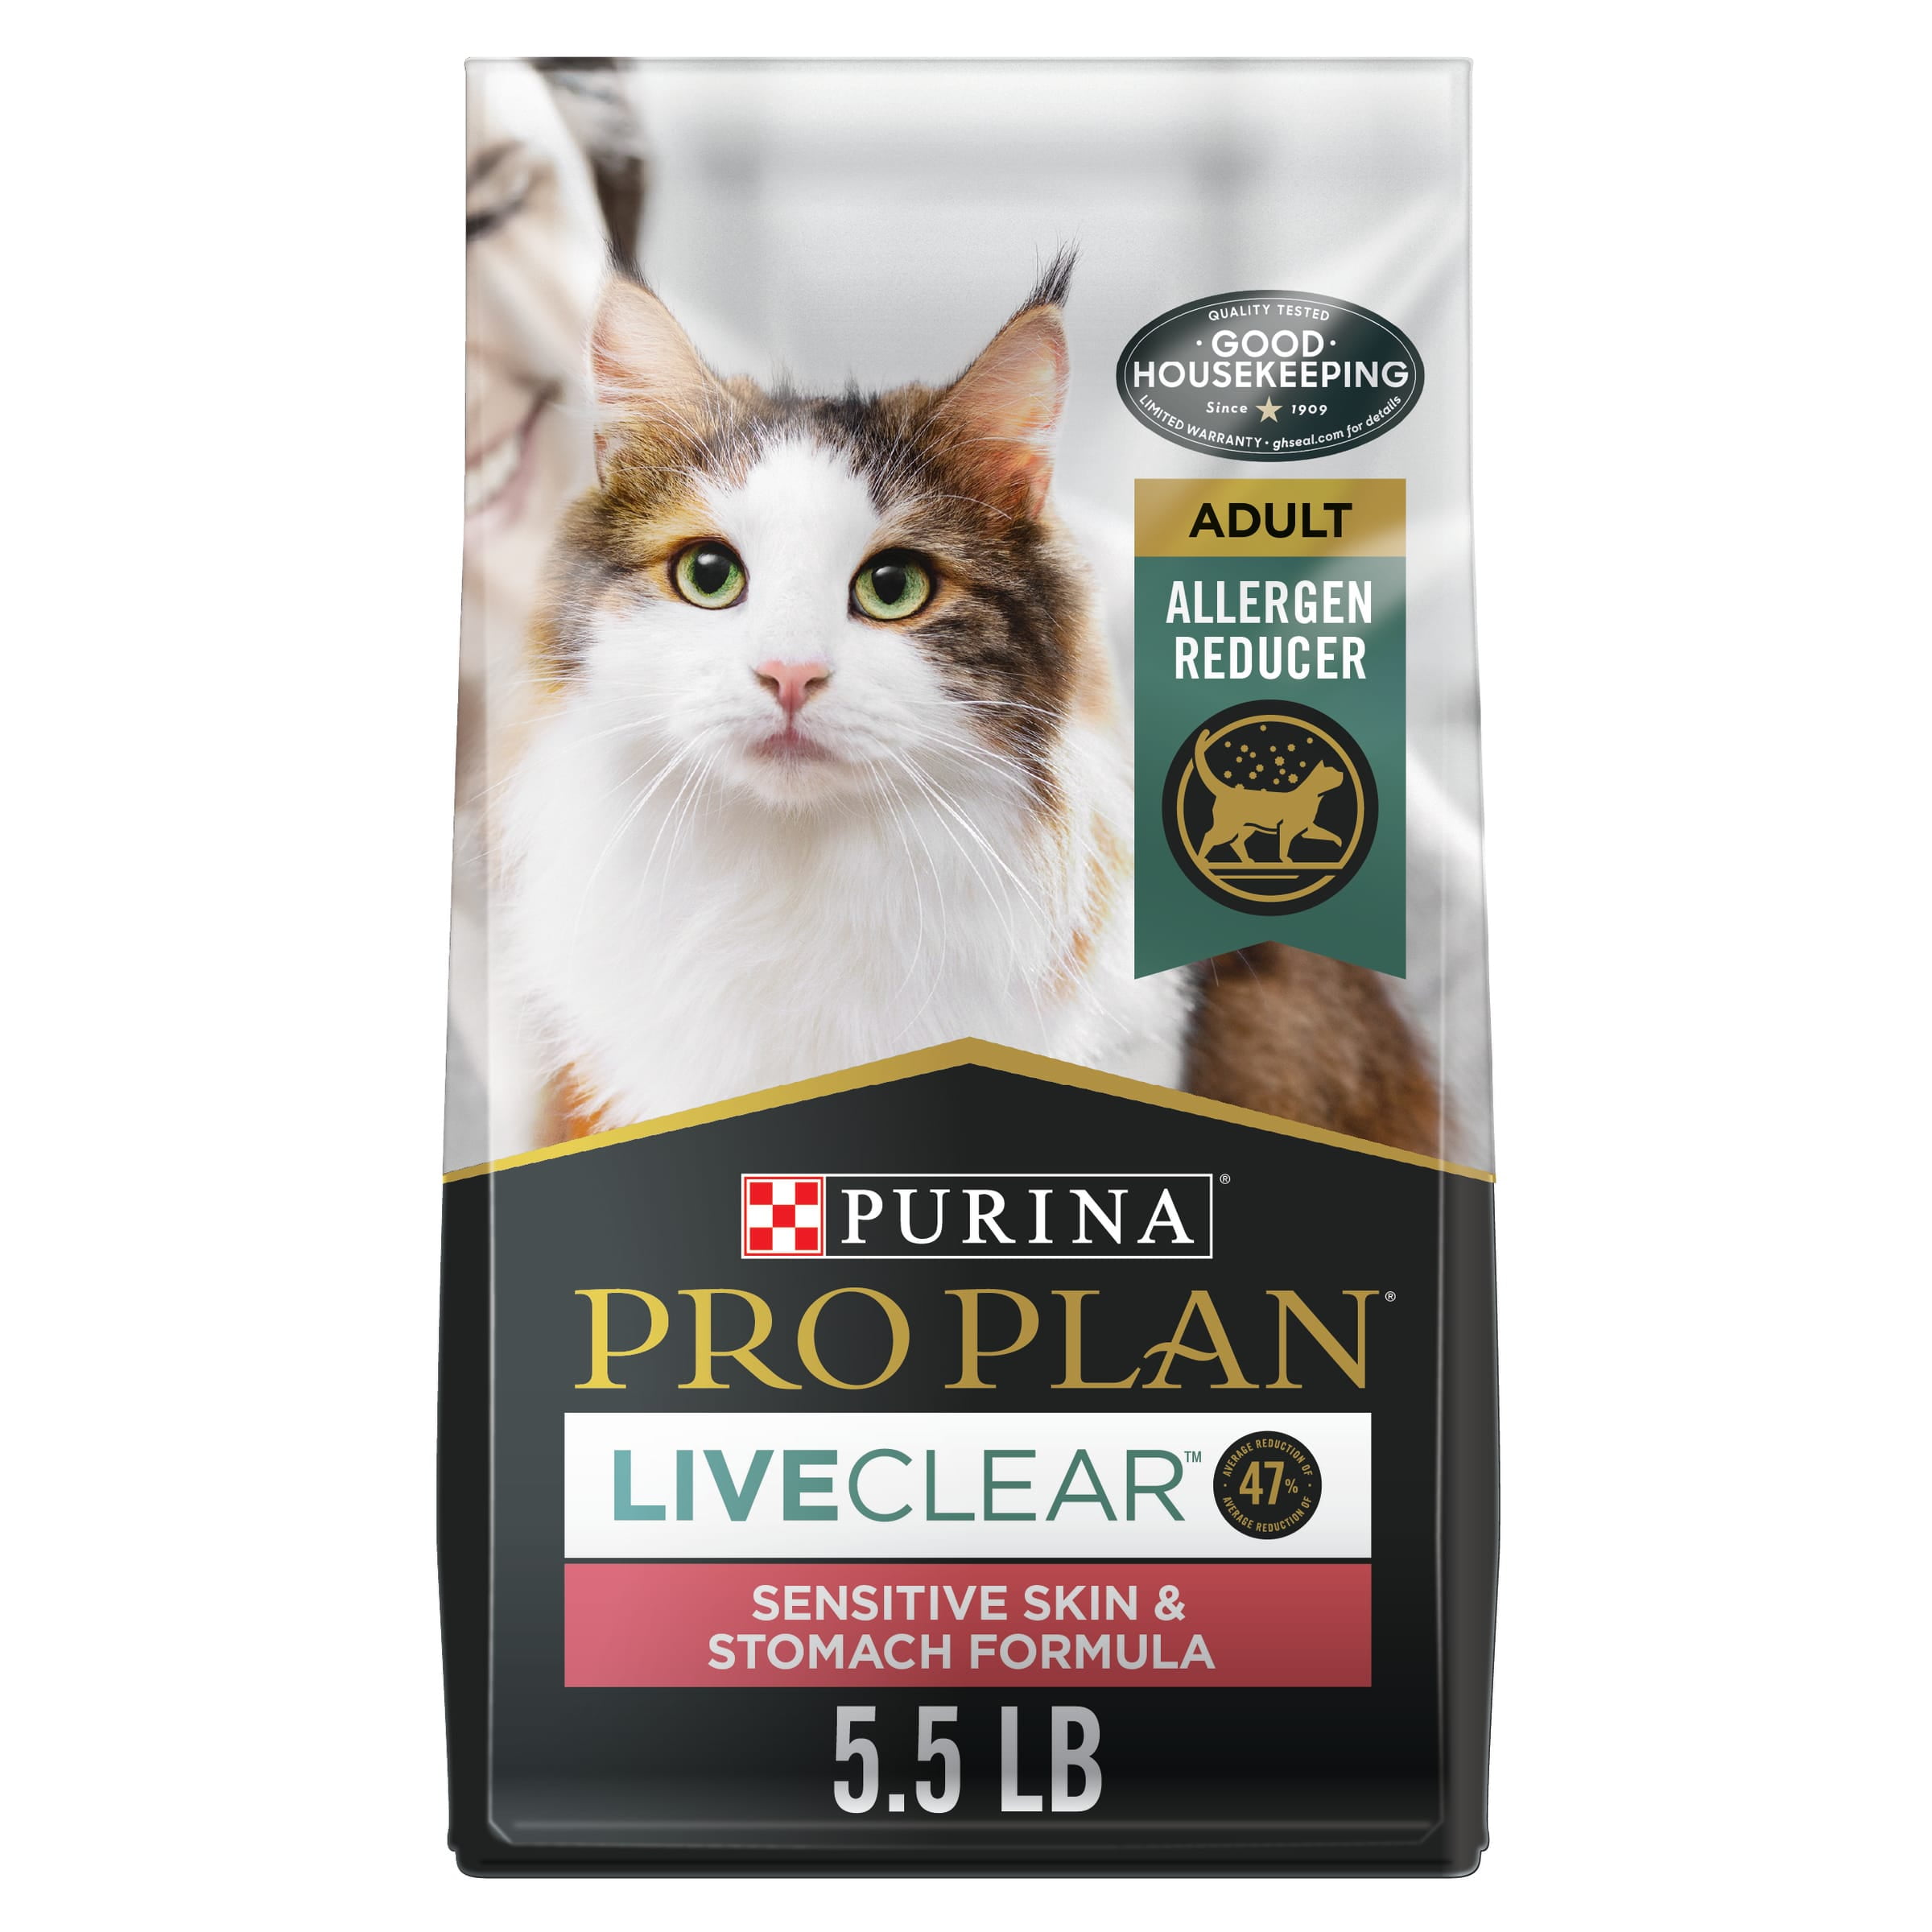 Purina Pro Plan Allergen Reducing, High Protein Cat Food, LIVECLEAR Turkey  and Oatmeal Formula, 3.2 lb. Bag 